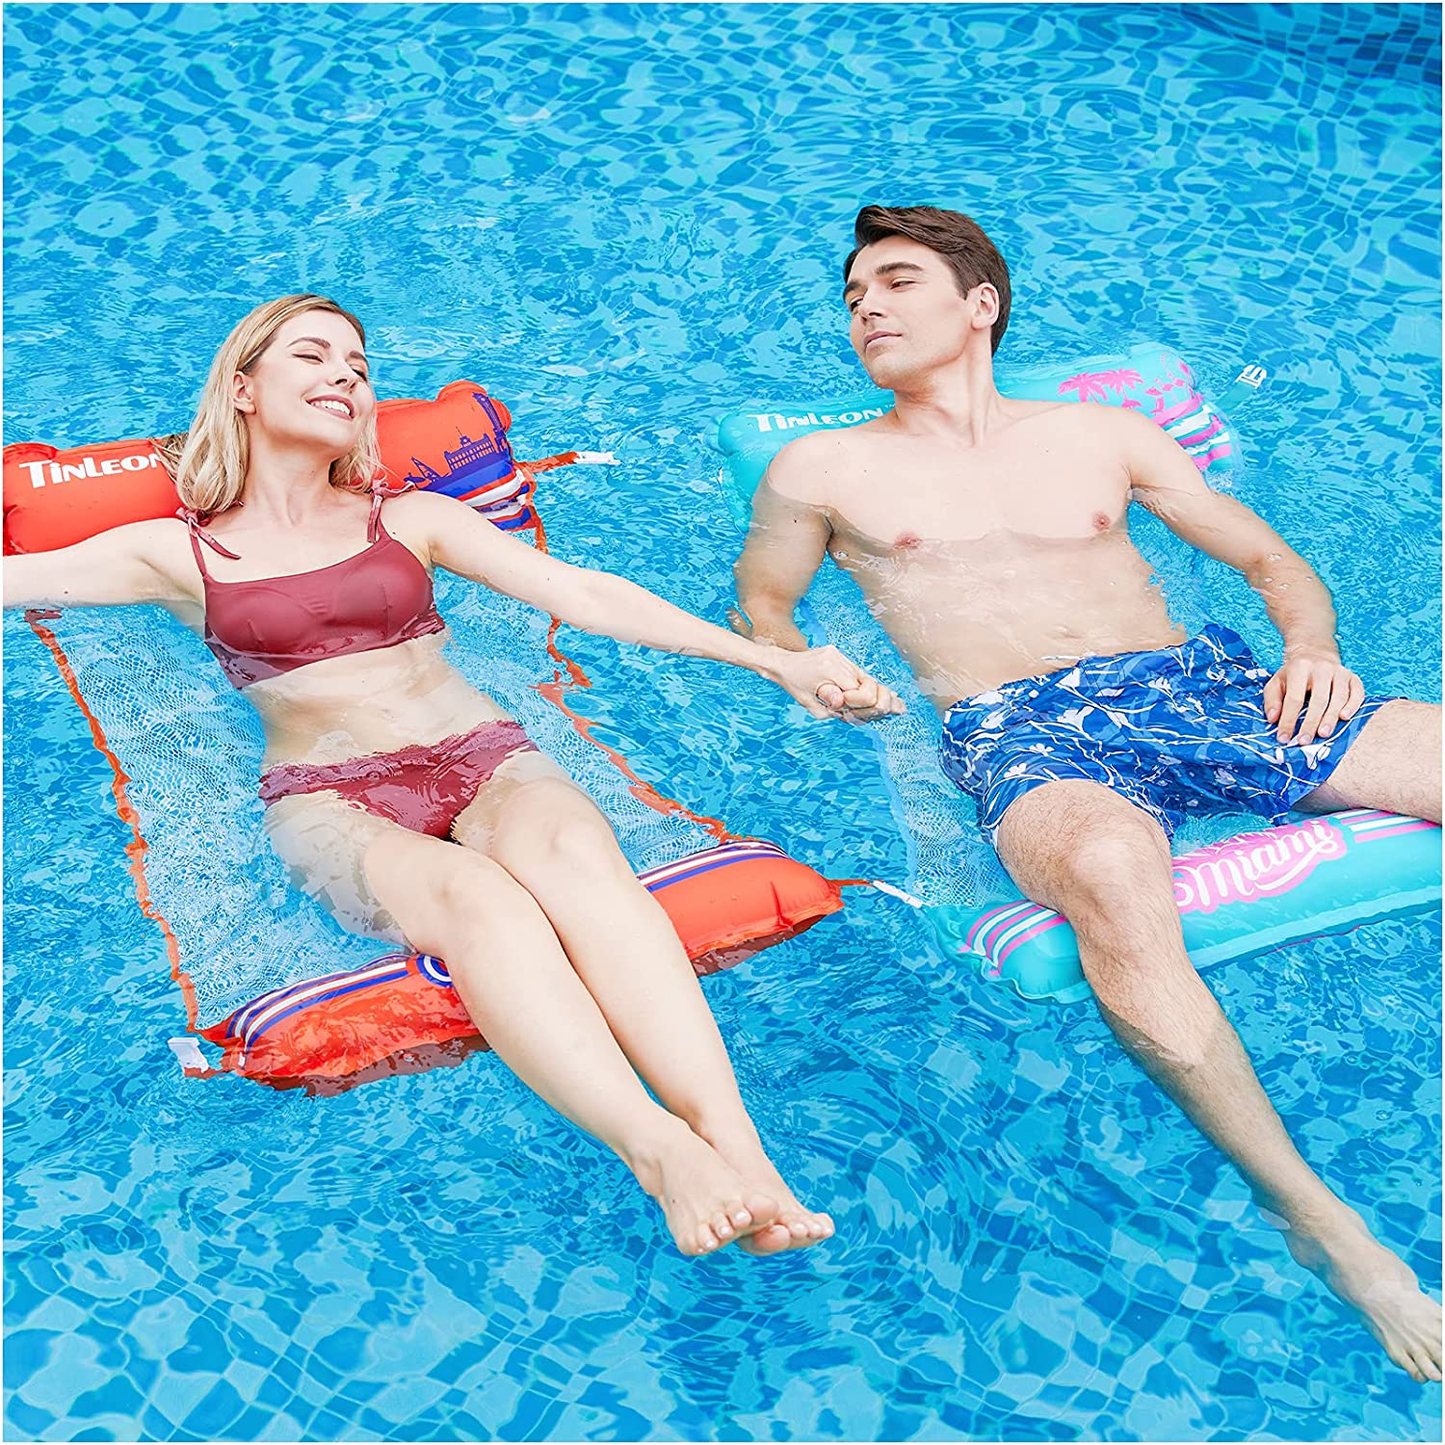 Pool Float Hammock for Adults: 2-Pack Inflatable Pool Float for Adults, City Series Miami & Hawaii Theme Floats -Multi-Purpose (Saddle, Lounge Chair, Hammock, Drifter) Portable Water Hammock